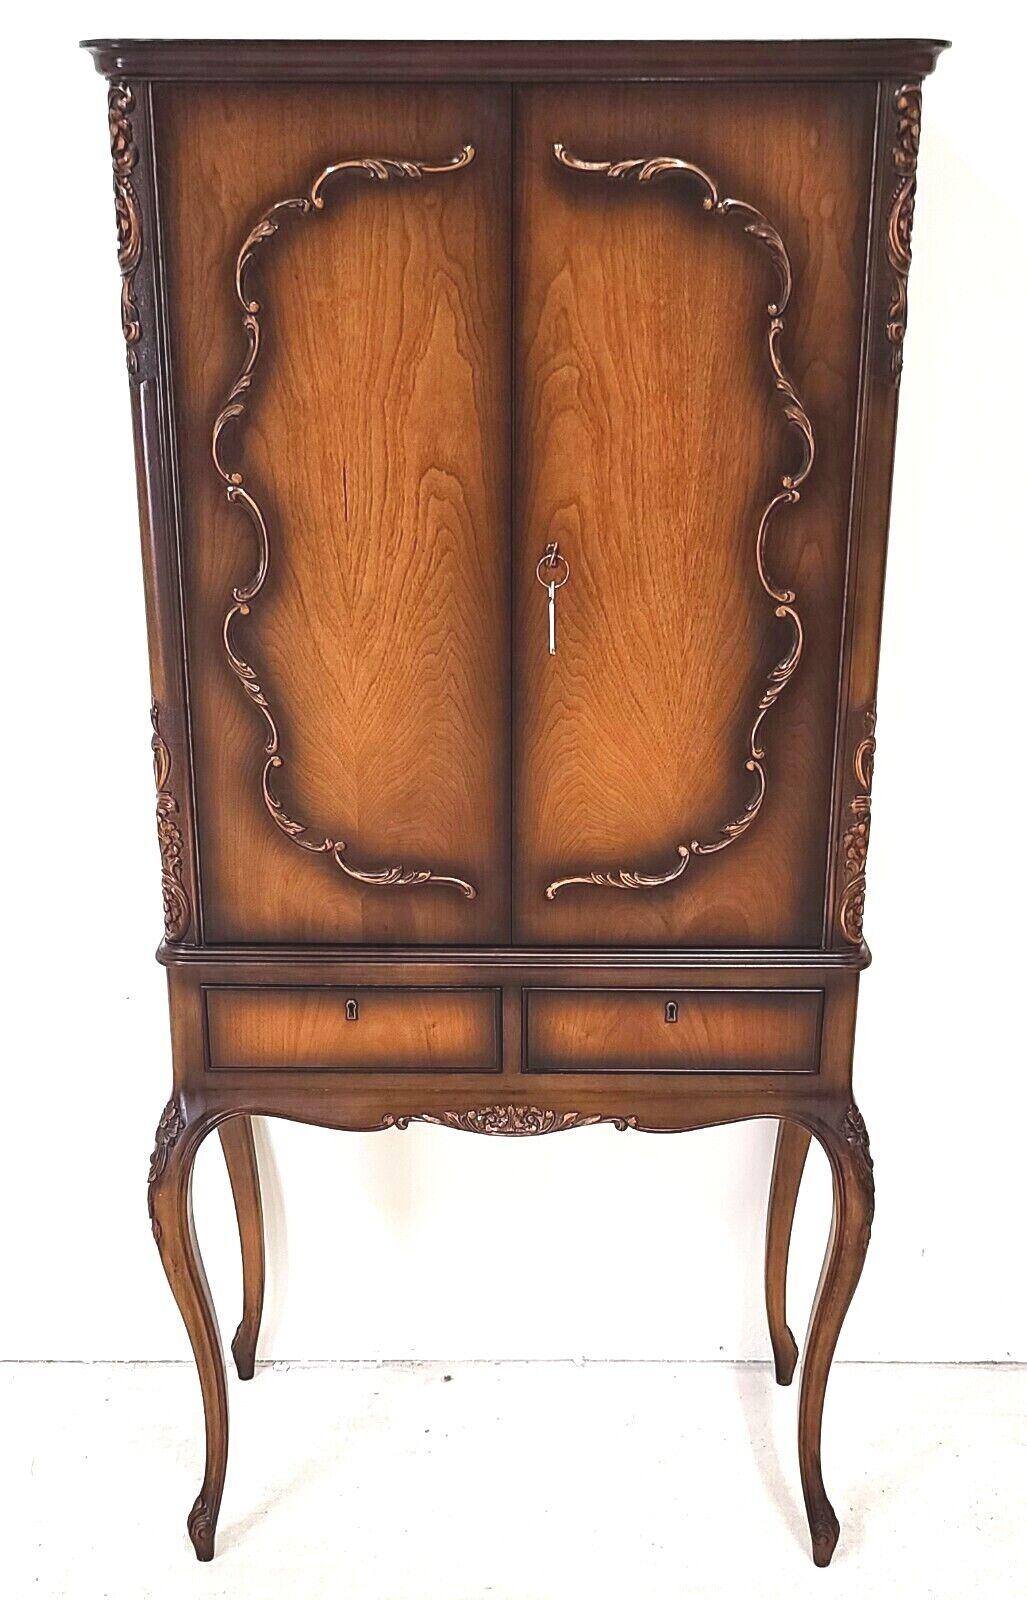 For FULL item description be sure to click on CONTINUE READING at the bottom of this listing.

Offering One Of Our Recent Palm Beach Estate Fine Furniture Acquisitions Of A
Mid-20th Century Italian Style African Yellowwood Bar Cabinet
Made in South